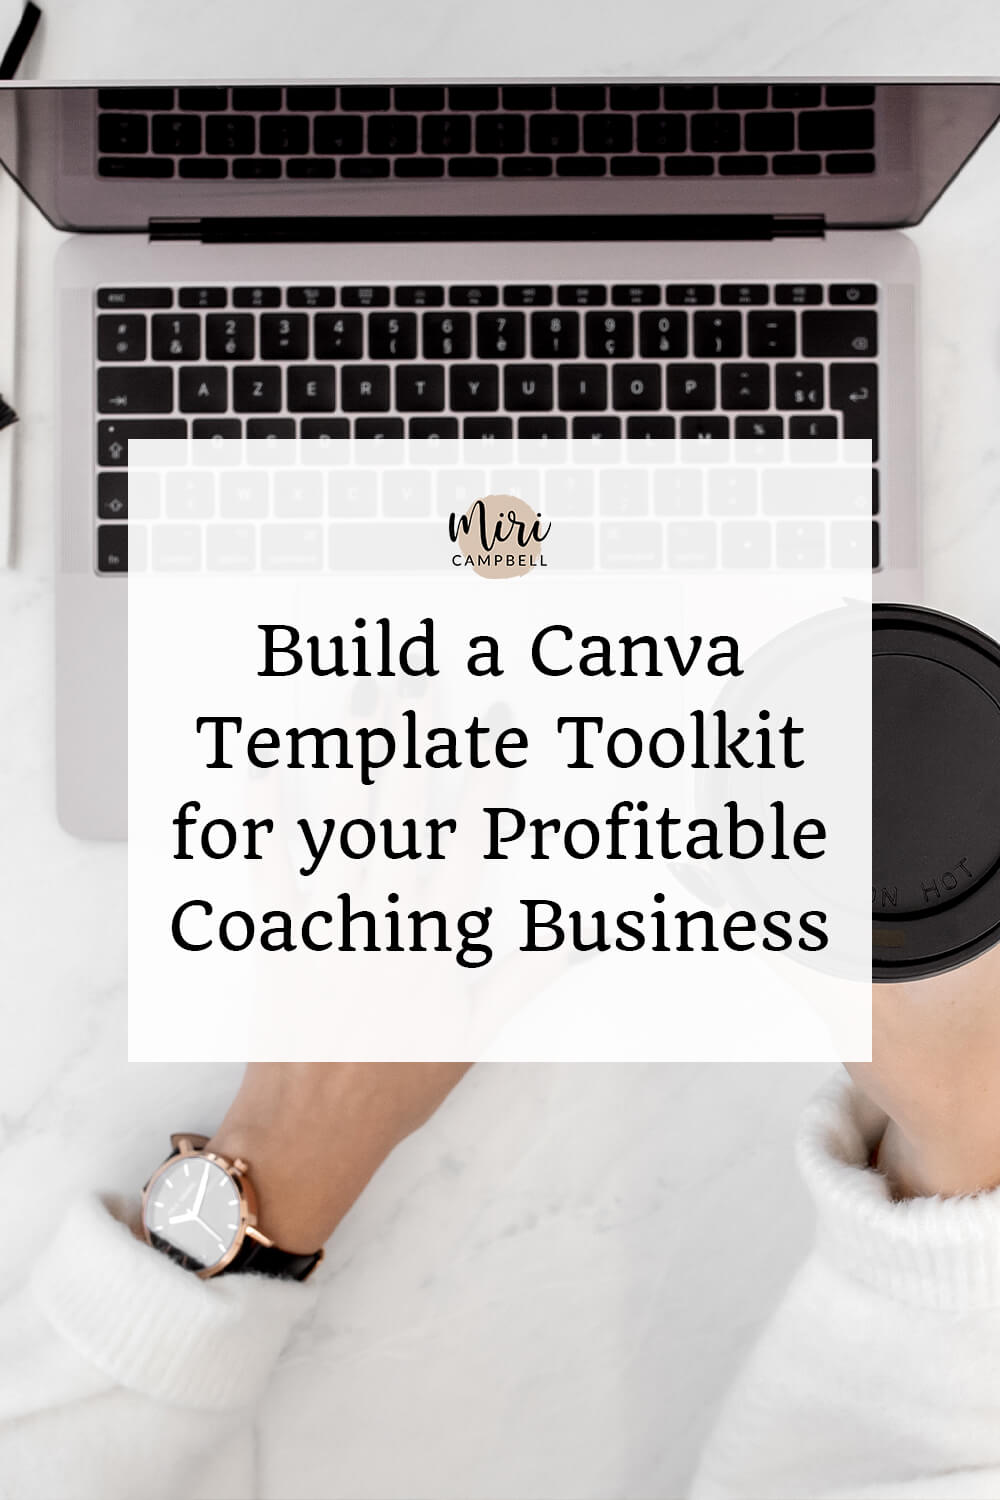 How to build a Canva template toolkit for a profitable coaching business